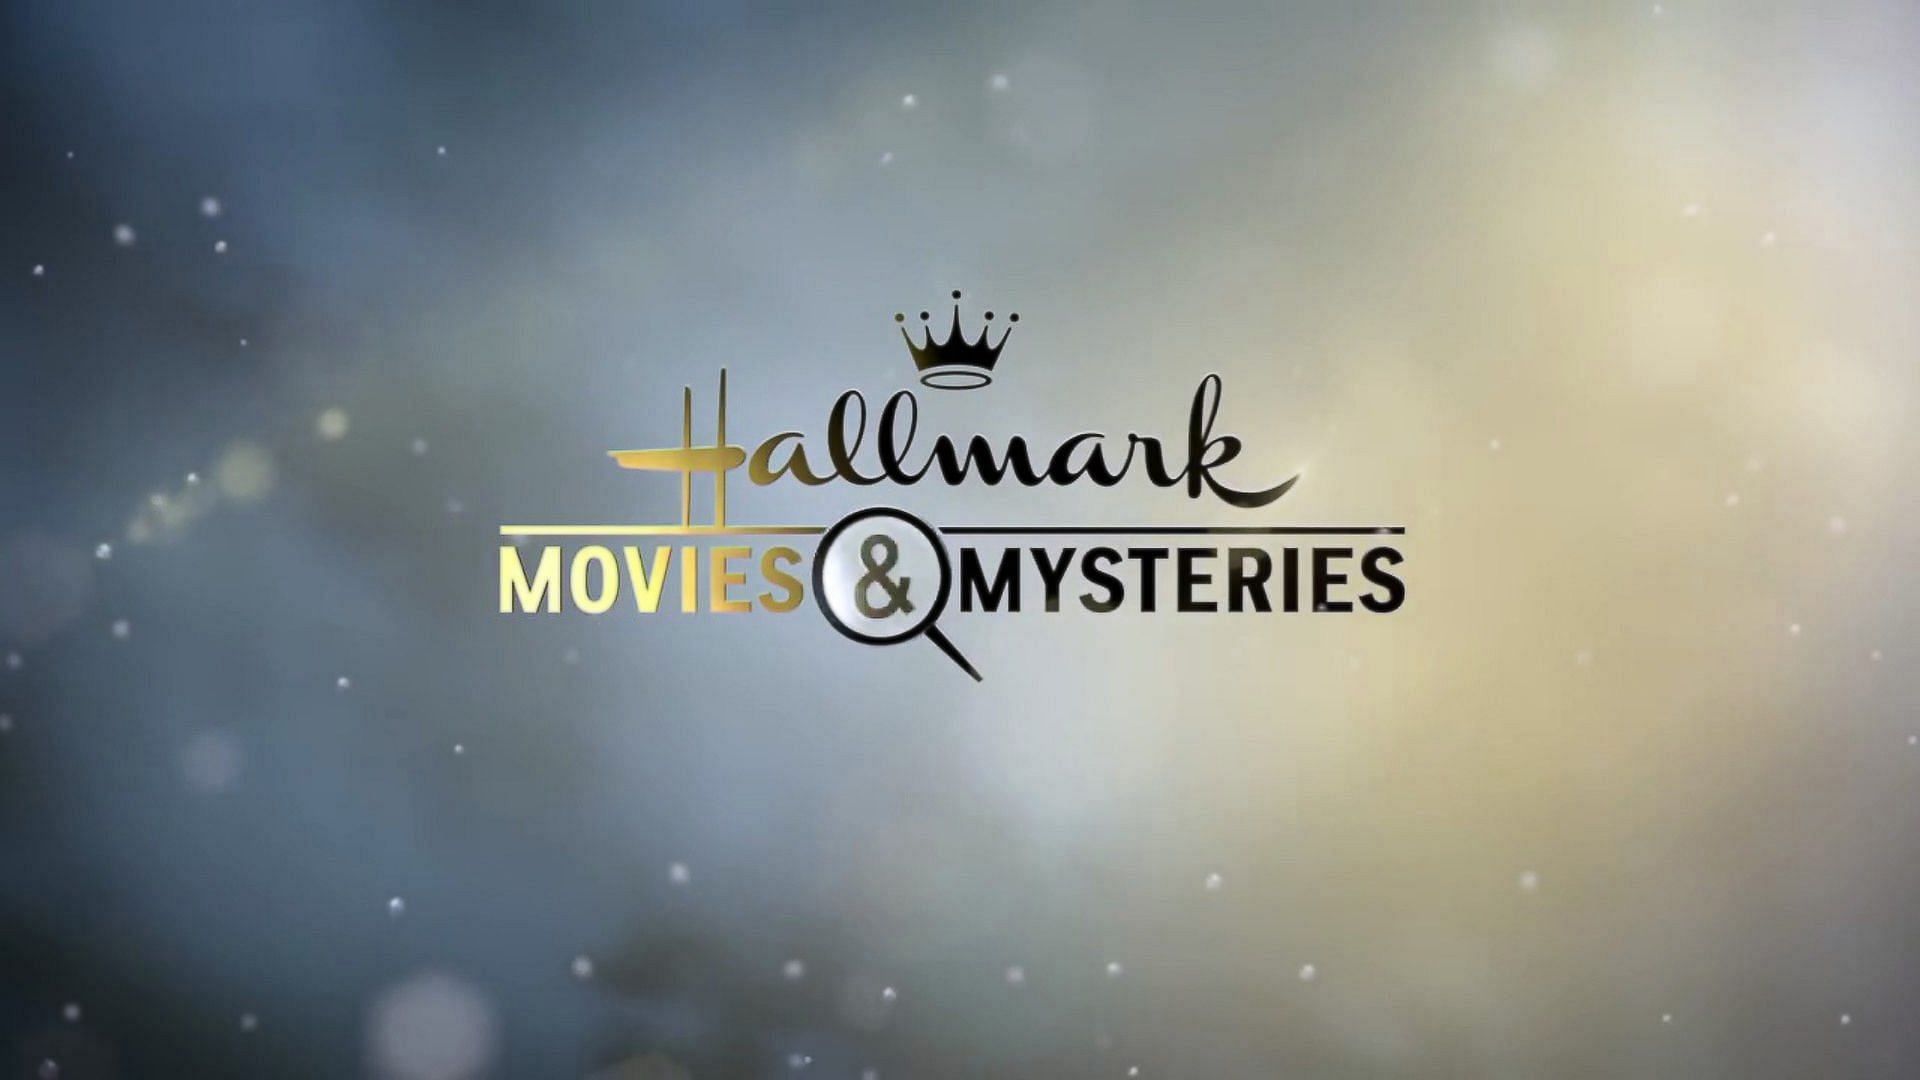 4 upcoming Hallmark Movies & Mysteries (HMM) releases of May and June 2023